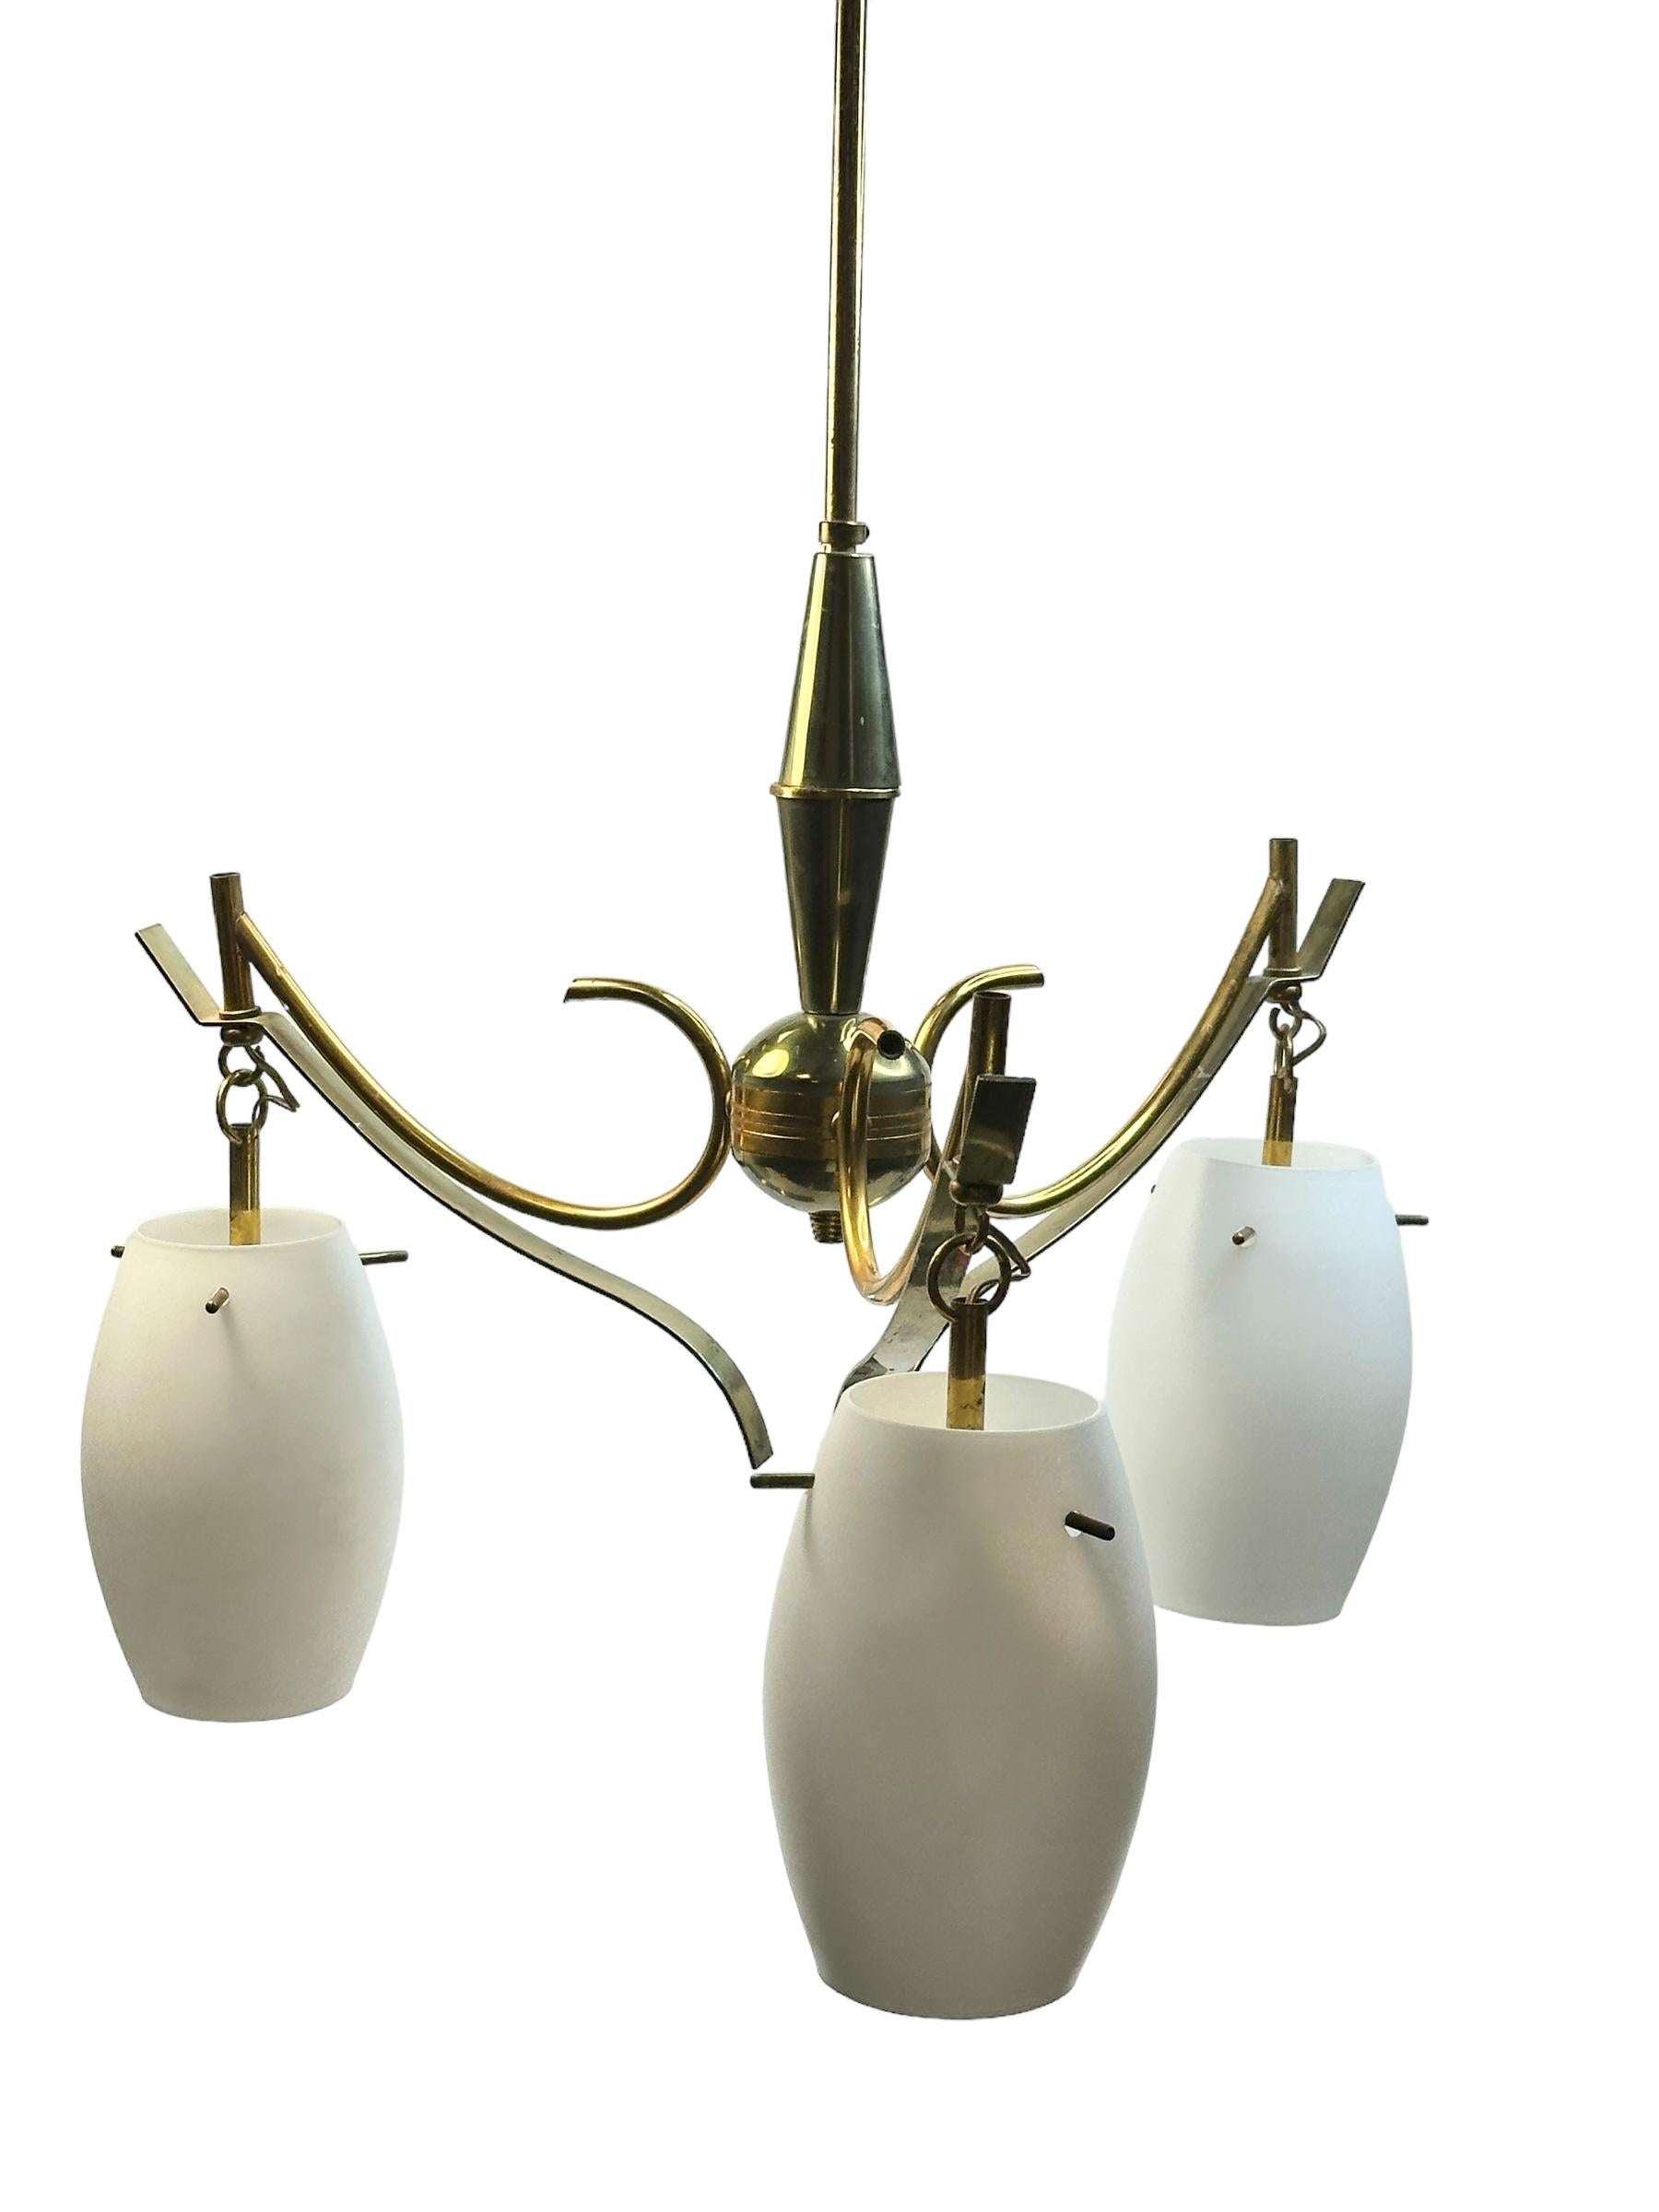 Lacquered Beautiful Three Light Brass & Glass Stilnovo Chandelier Vintage Italy, 1950s For Sale